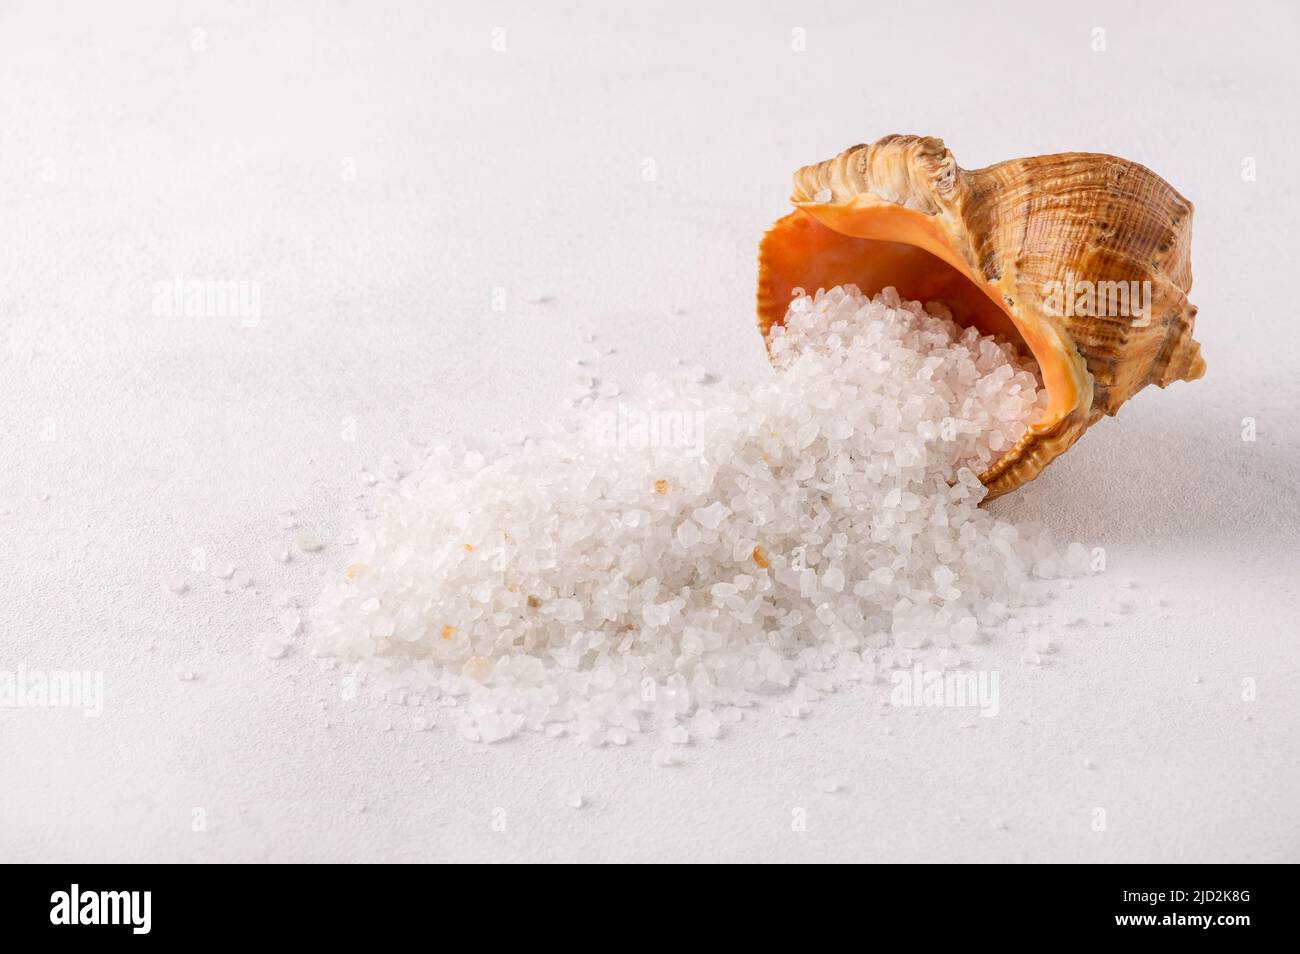 Organic spa sea salt is poured into a pile and a shell from the sea Stock Photo